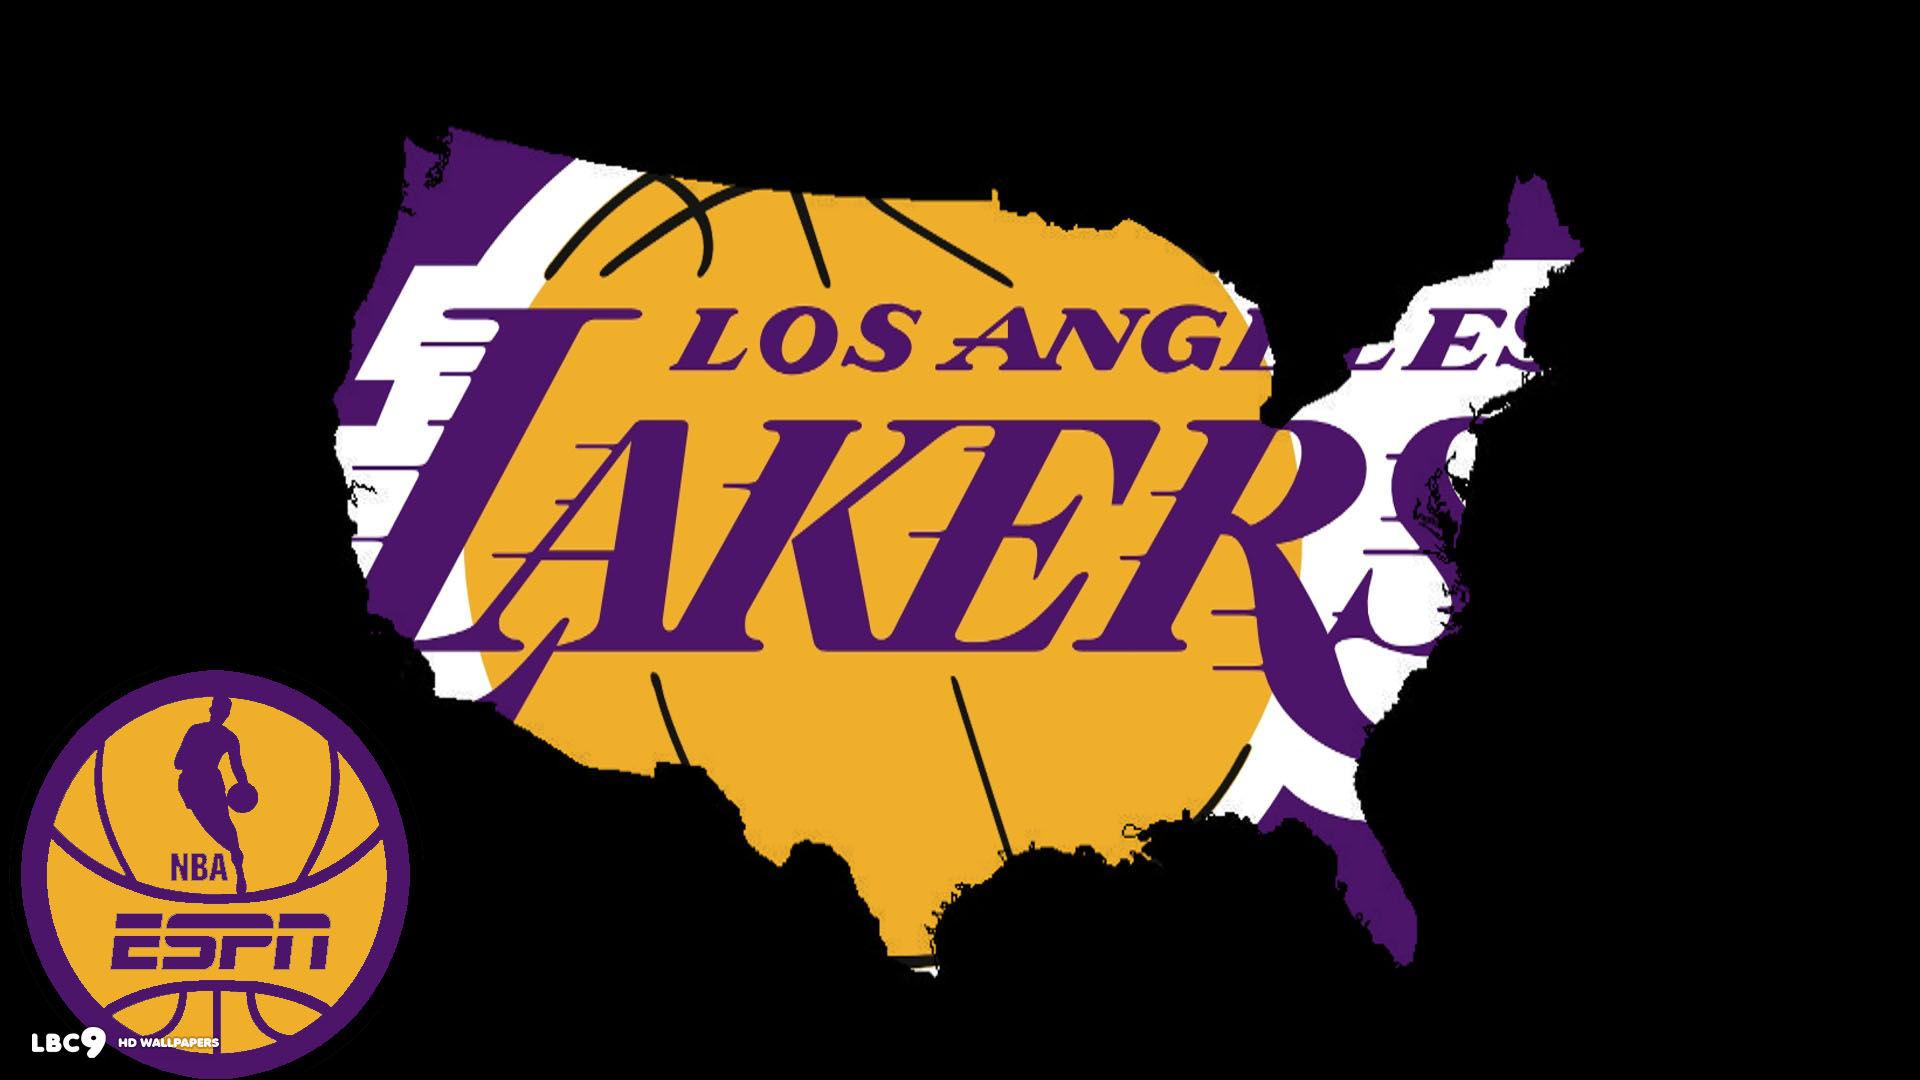 Los Angeles Lakers image Los Angeles Lakers Nation HD